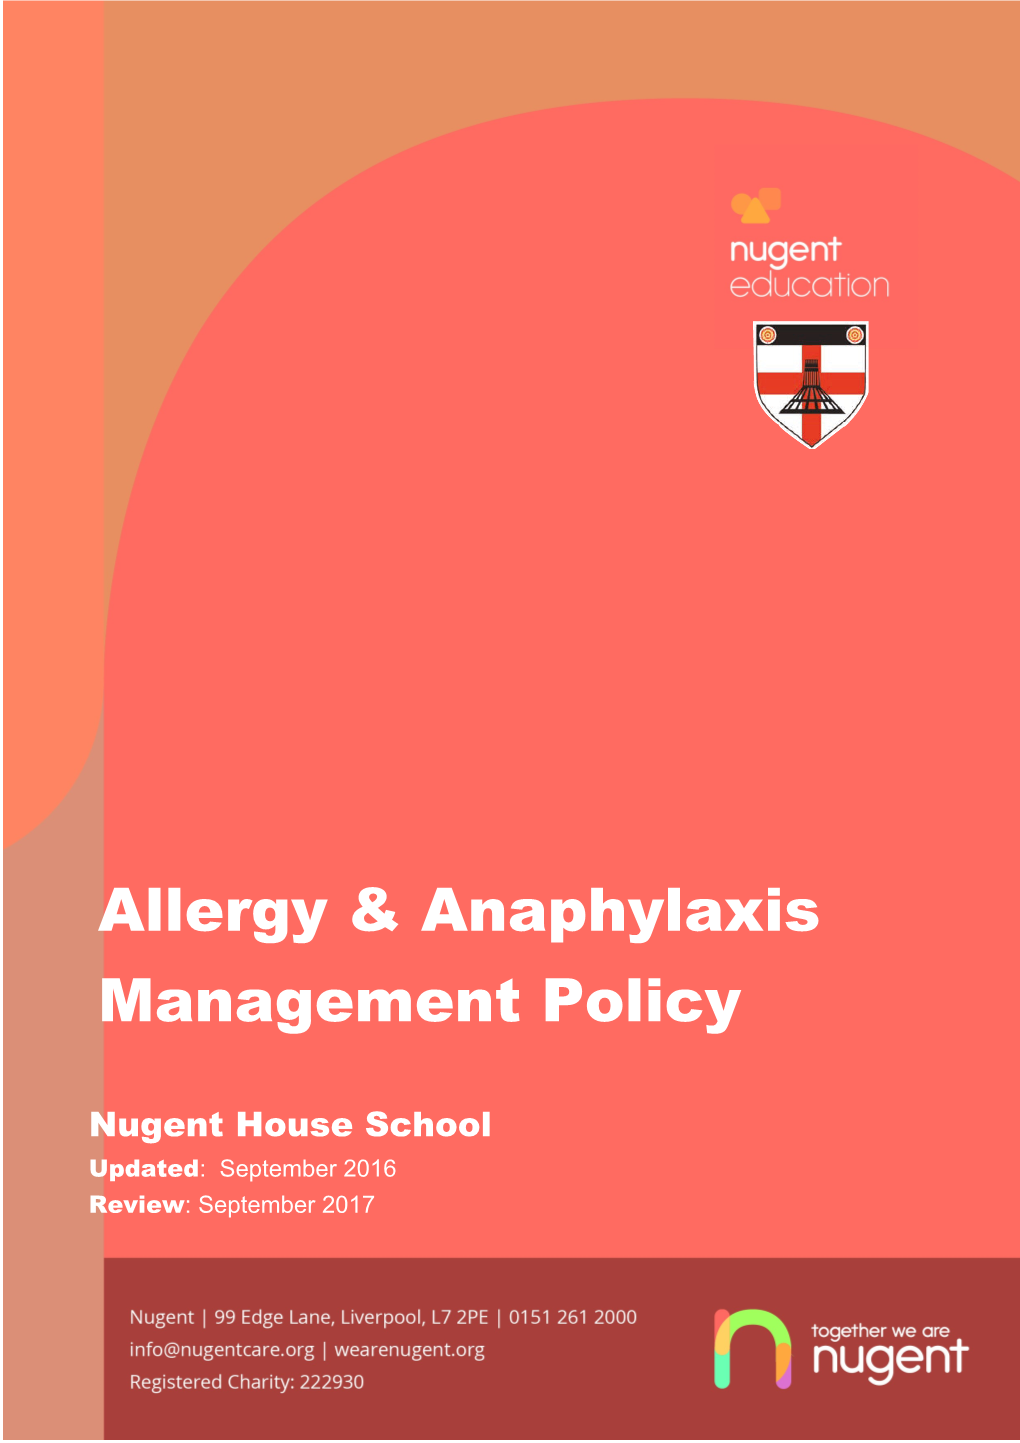 The School Is Committed to Proactive Risk Allergy Management Through